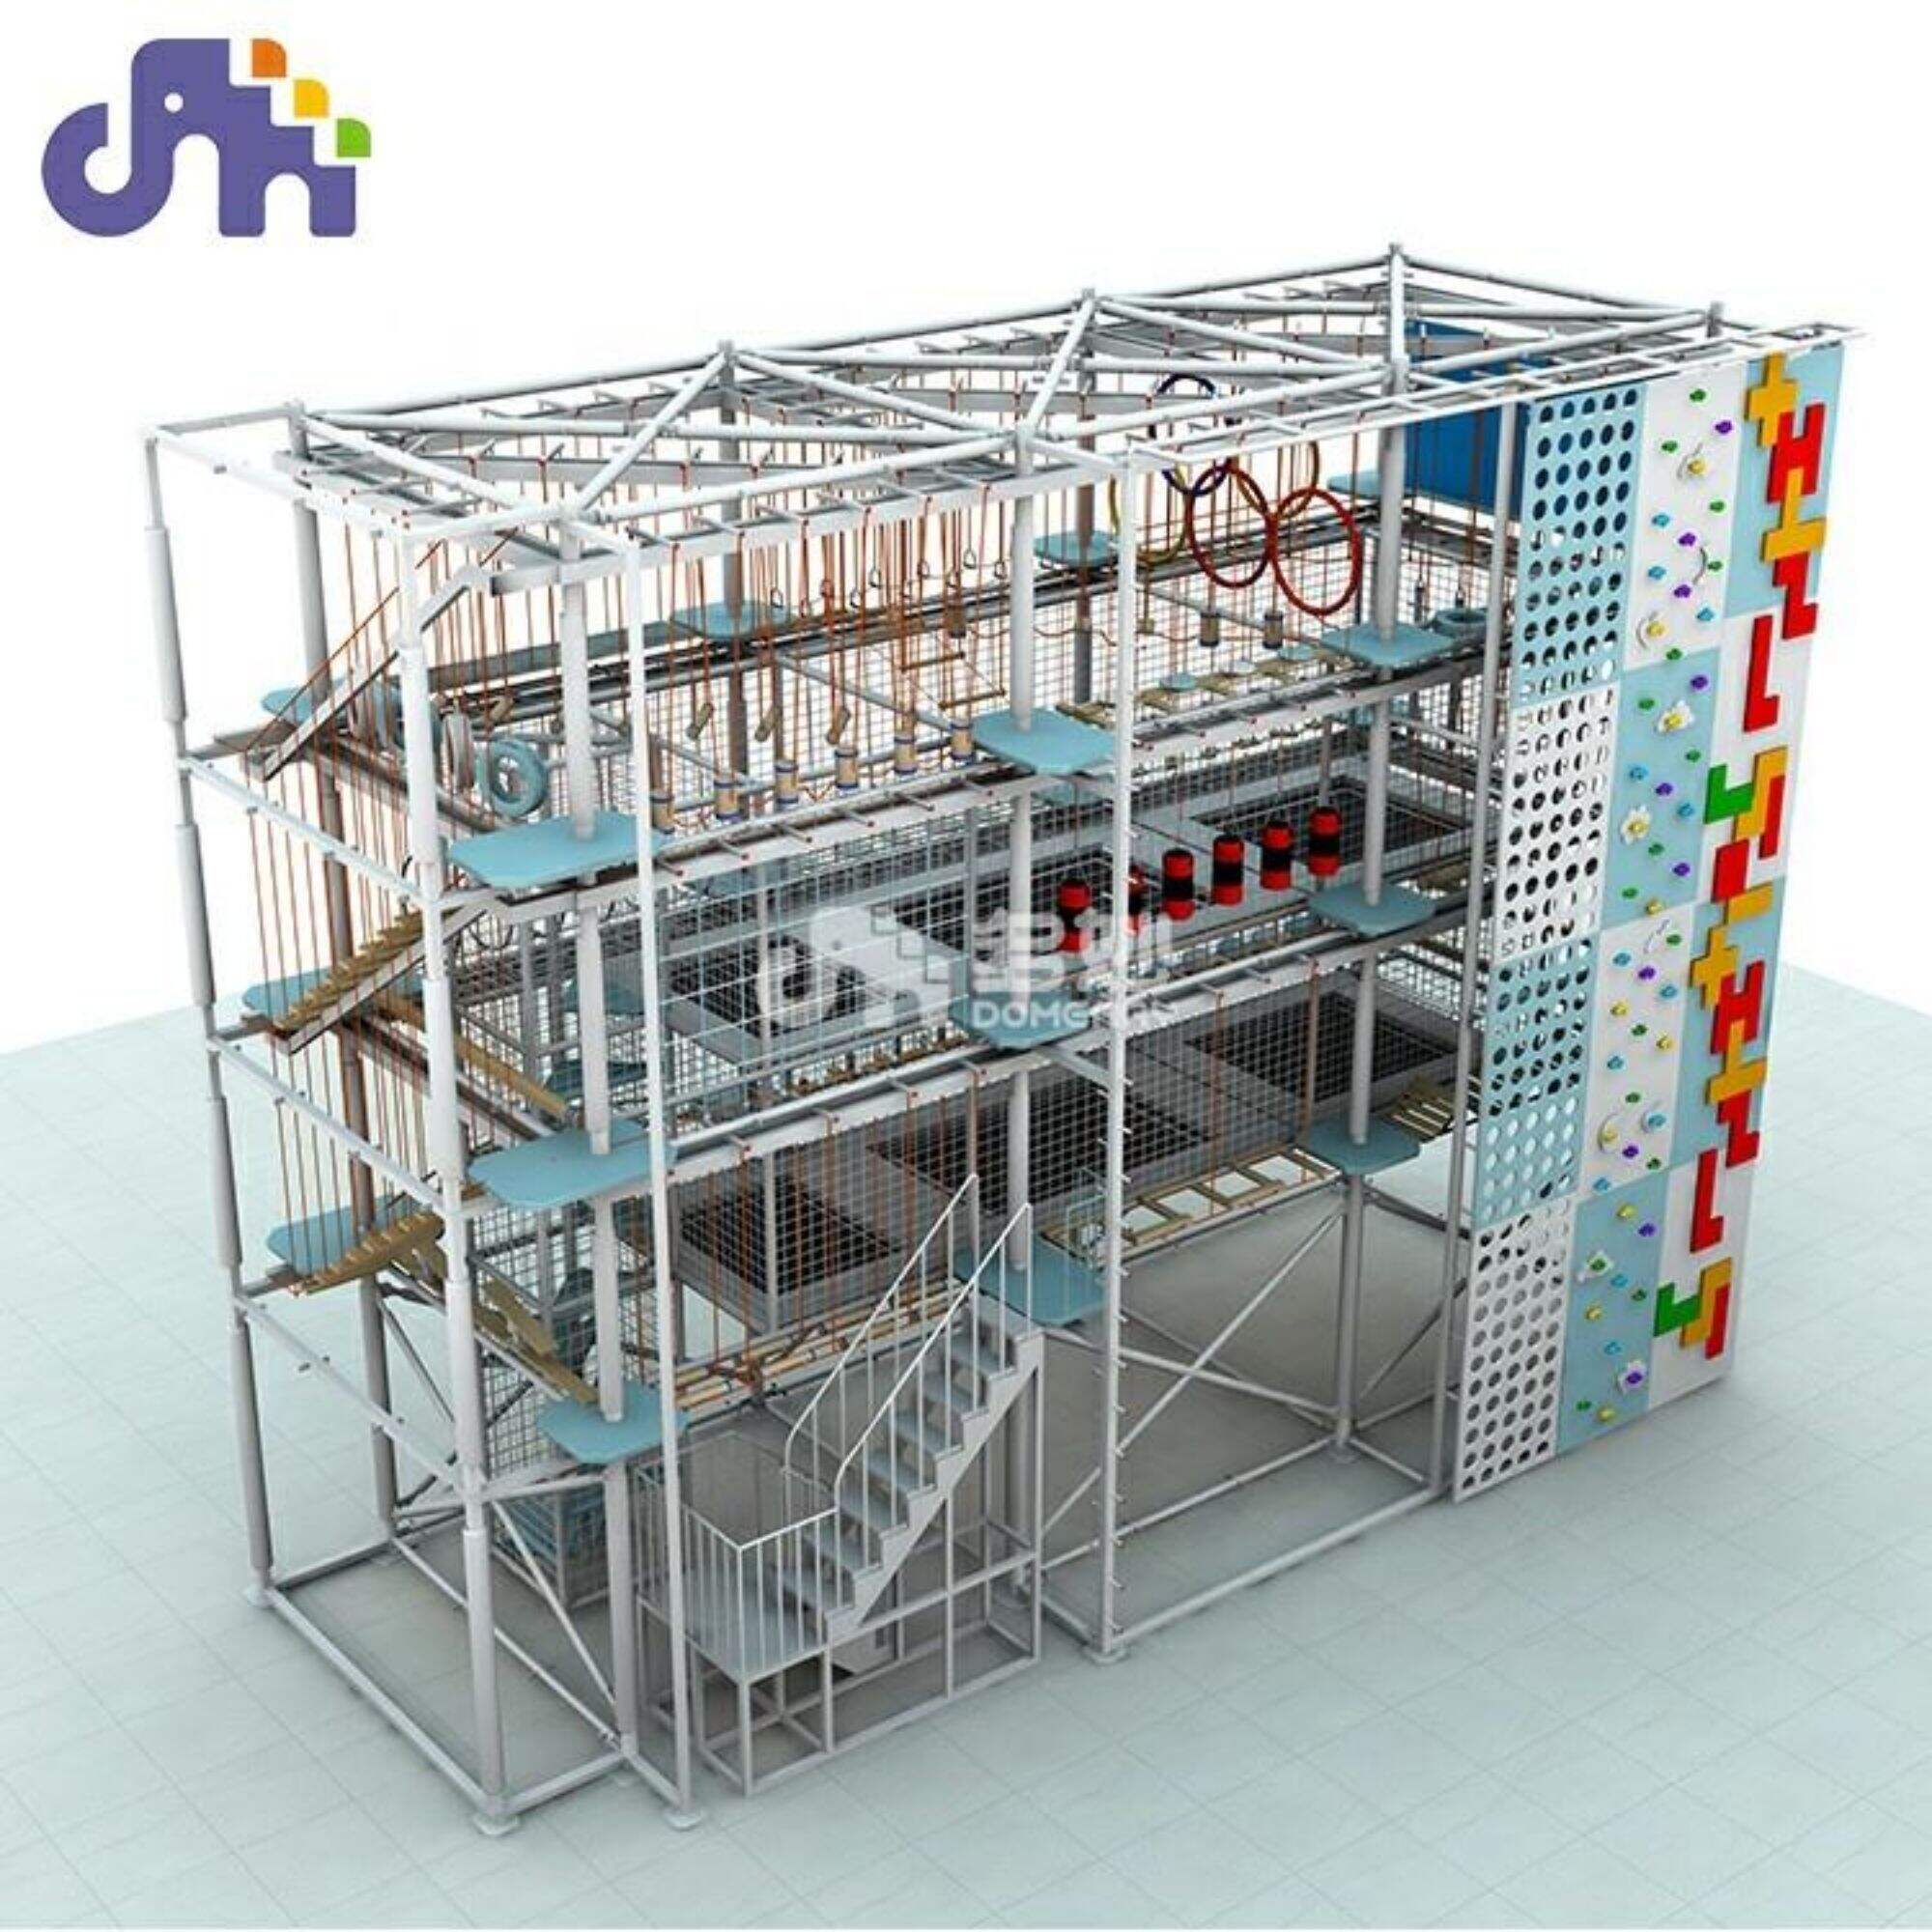 Domerry amusement equipment kid gym high rope course adventure park customized playground